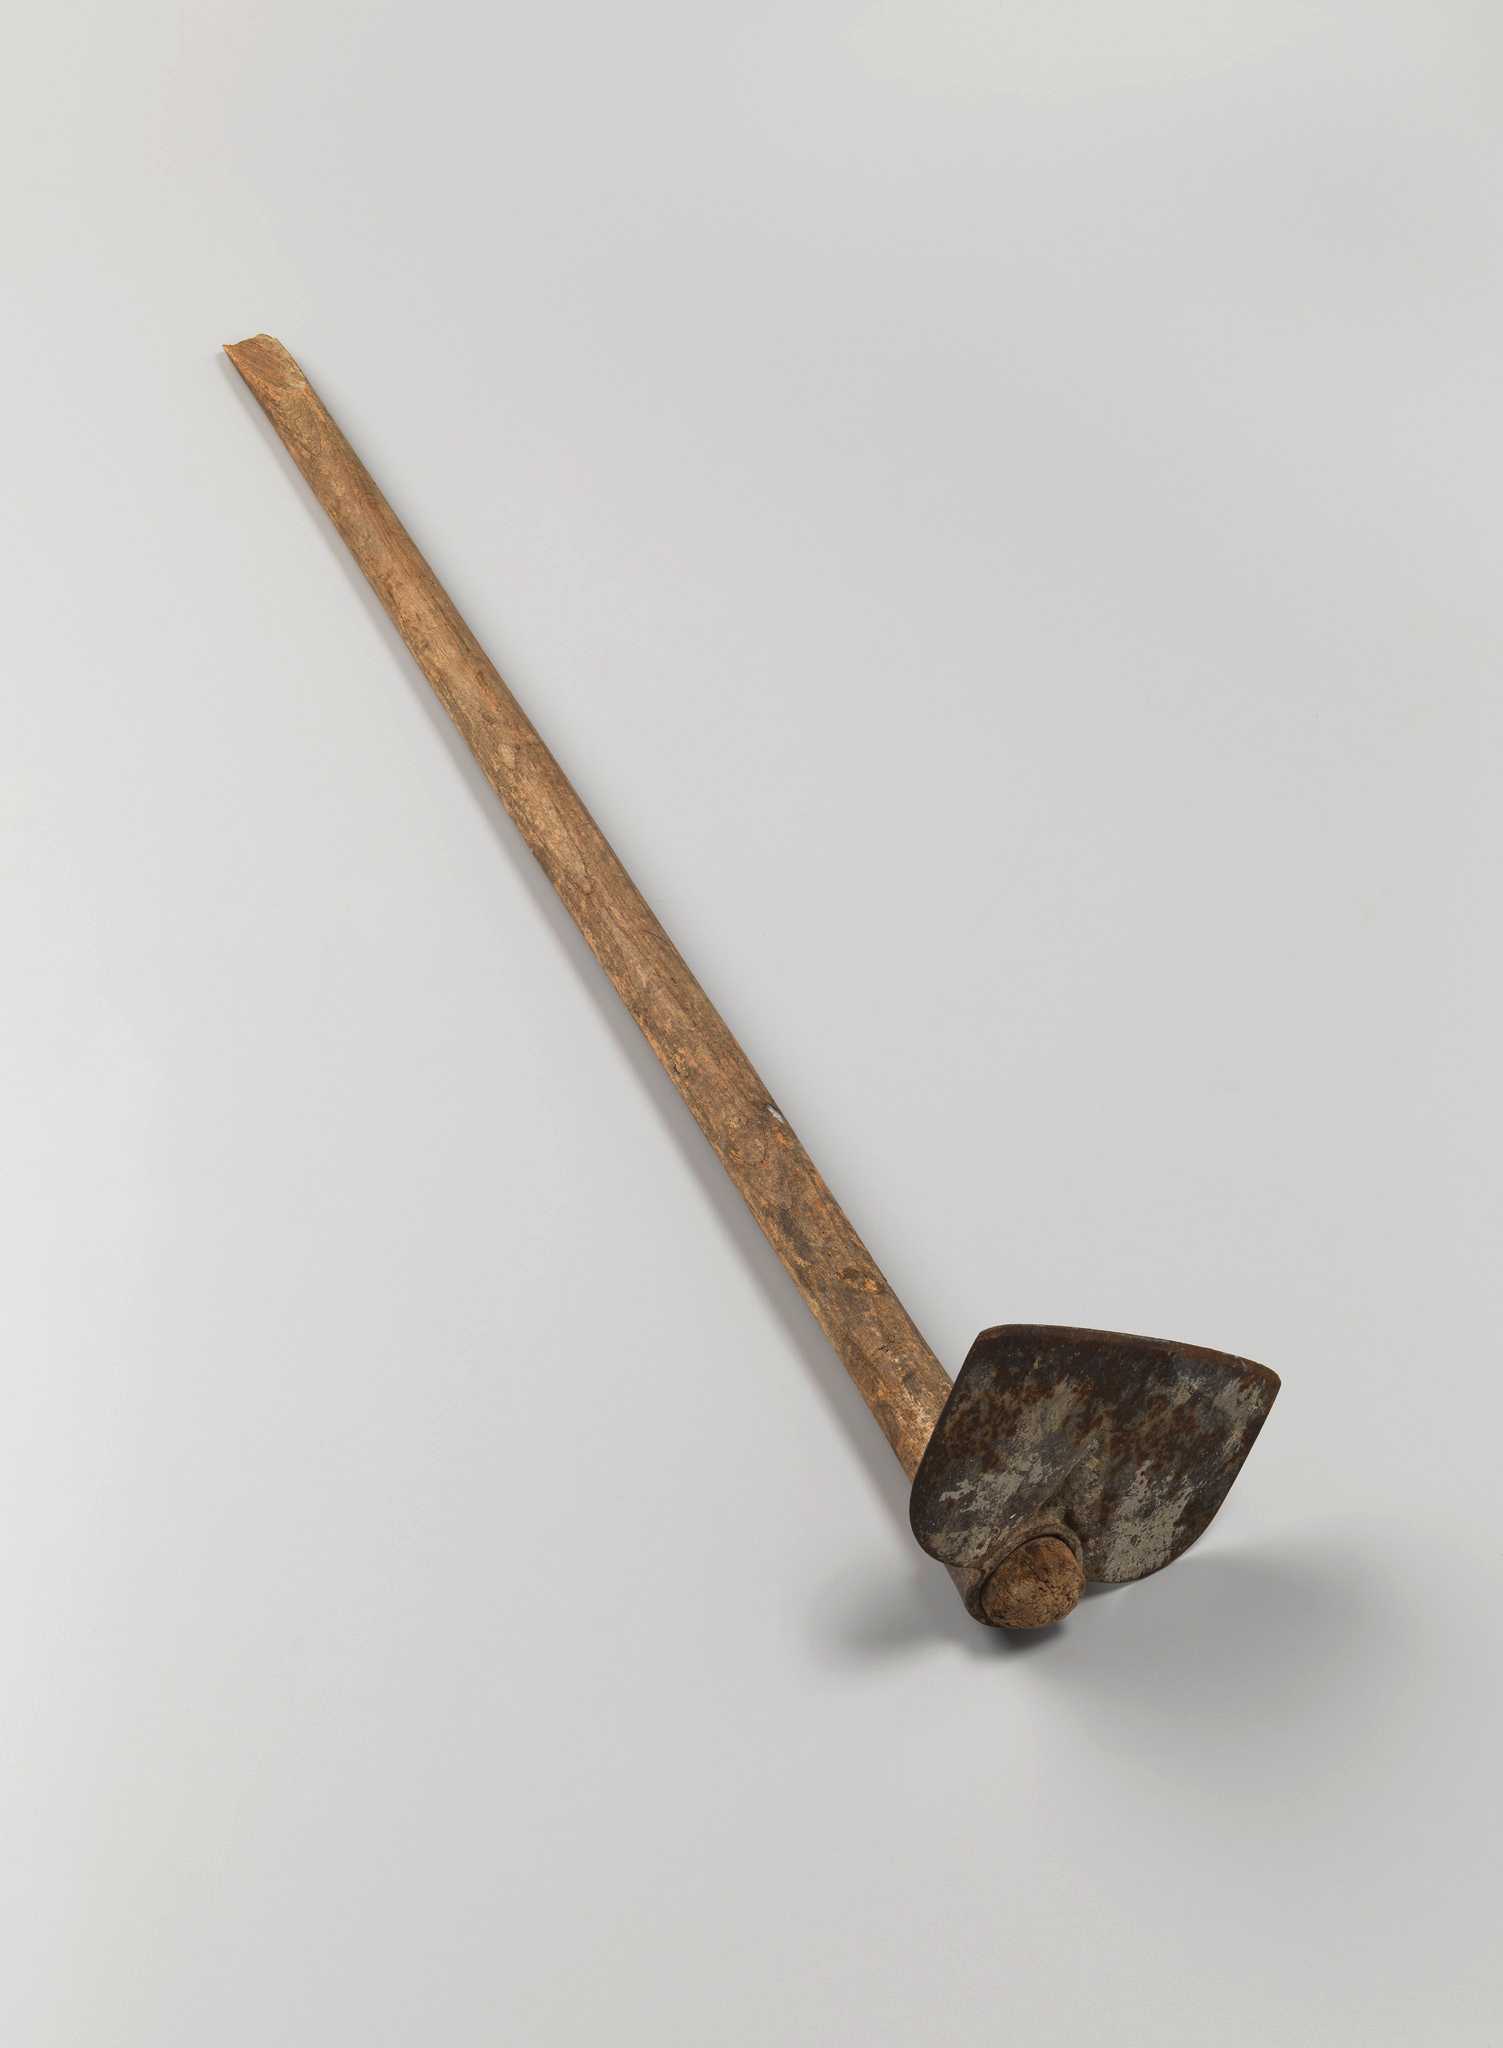 A draw hoe with a wooden handle. The hoe is mounted perpendicularly to the handle through an eye at the base of the hoe head. The hoe blade has rounded shoulders and a straight cutting edge. The handle is long and rounded. Near the top of the handle, the wood is split diagonally.